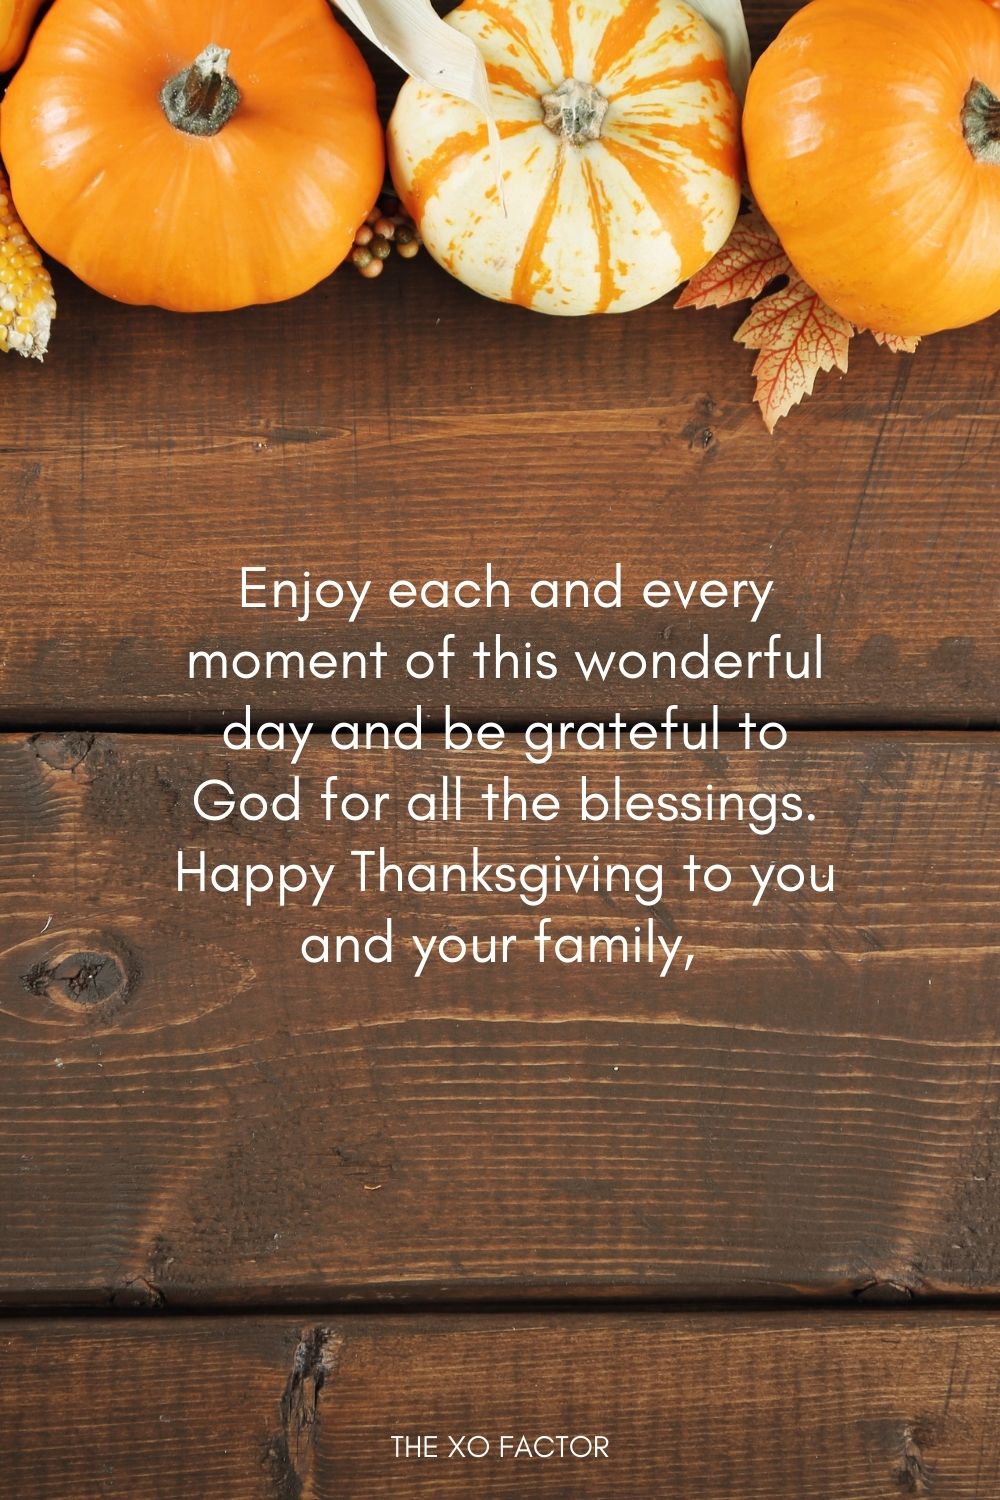 Enjoy each and every moment of this wonderful day and be grateful to God for all the blessings. Happy Thanksgiving to you and your family, have fun.